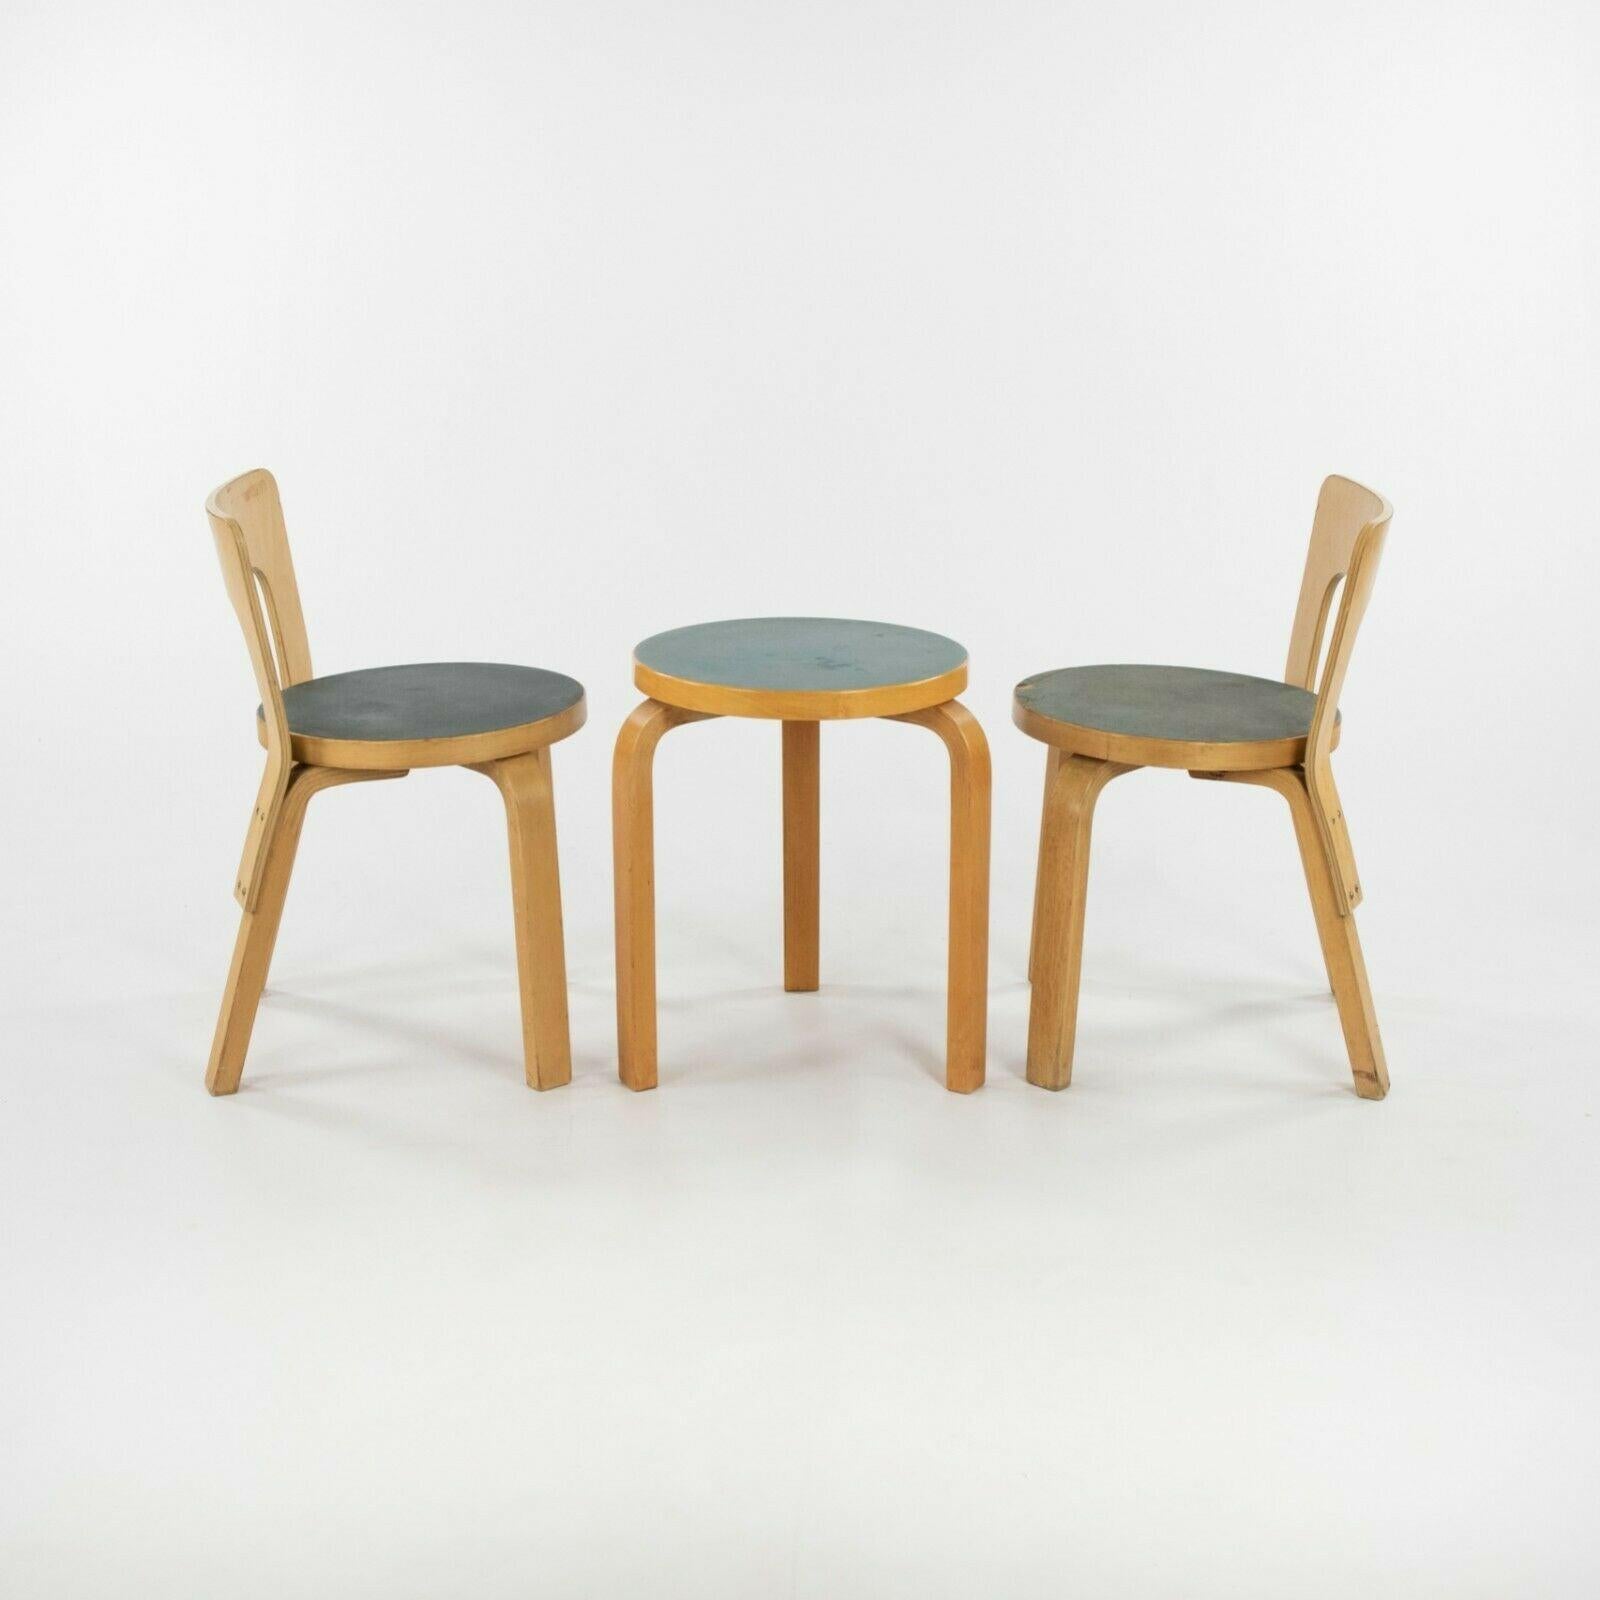 1950s Pair of Alvar & Aino Aalto N65 Childrens / Childs Chairs With Blue Seats For Sale 3